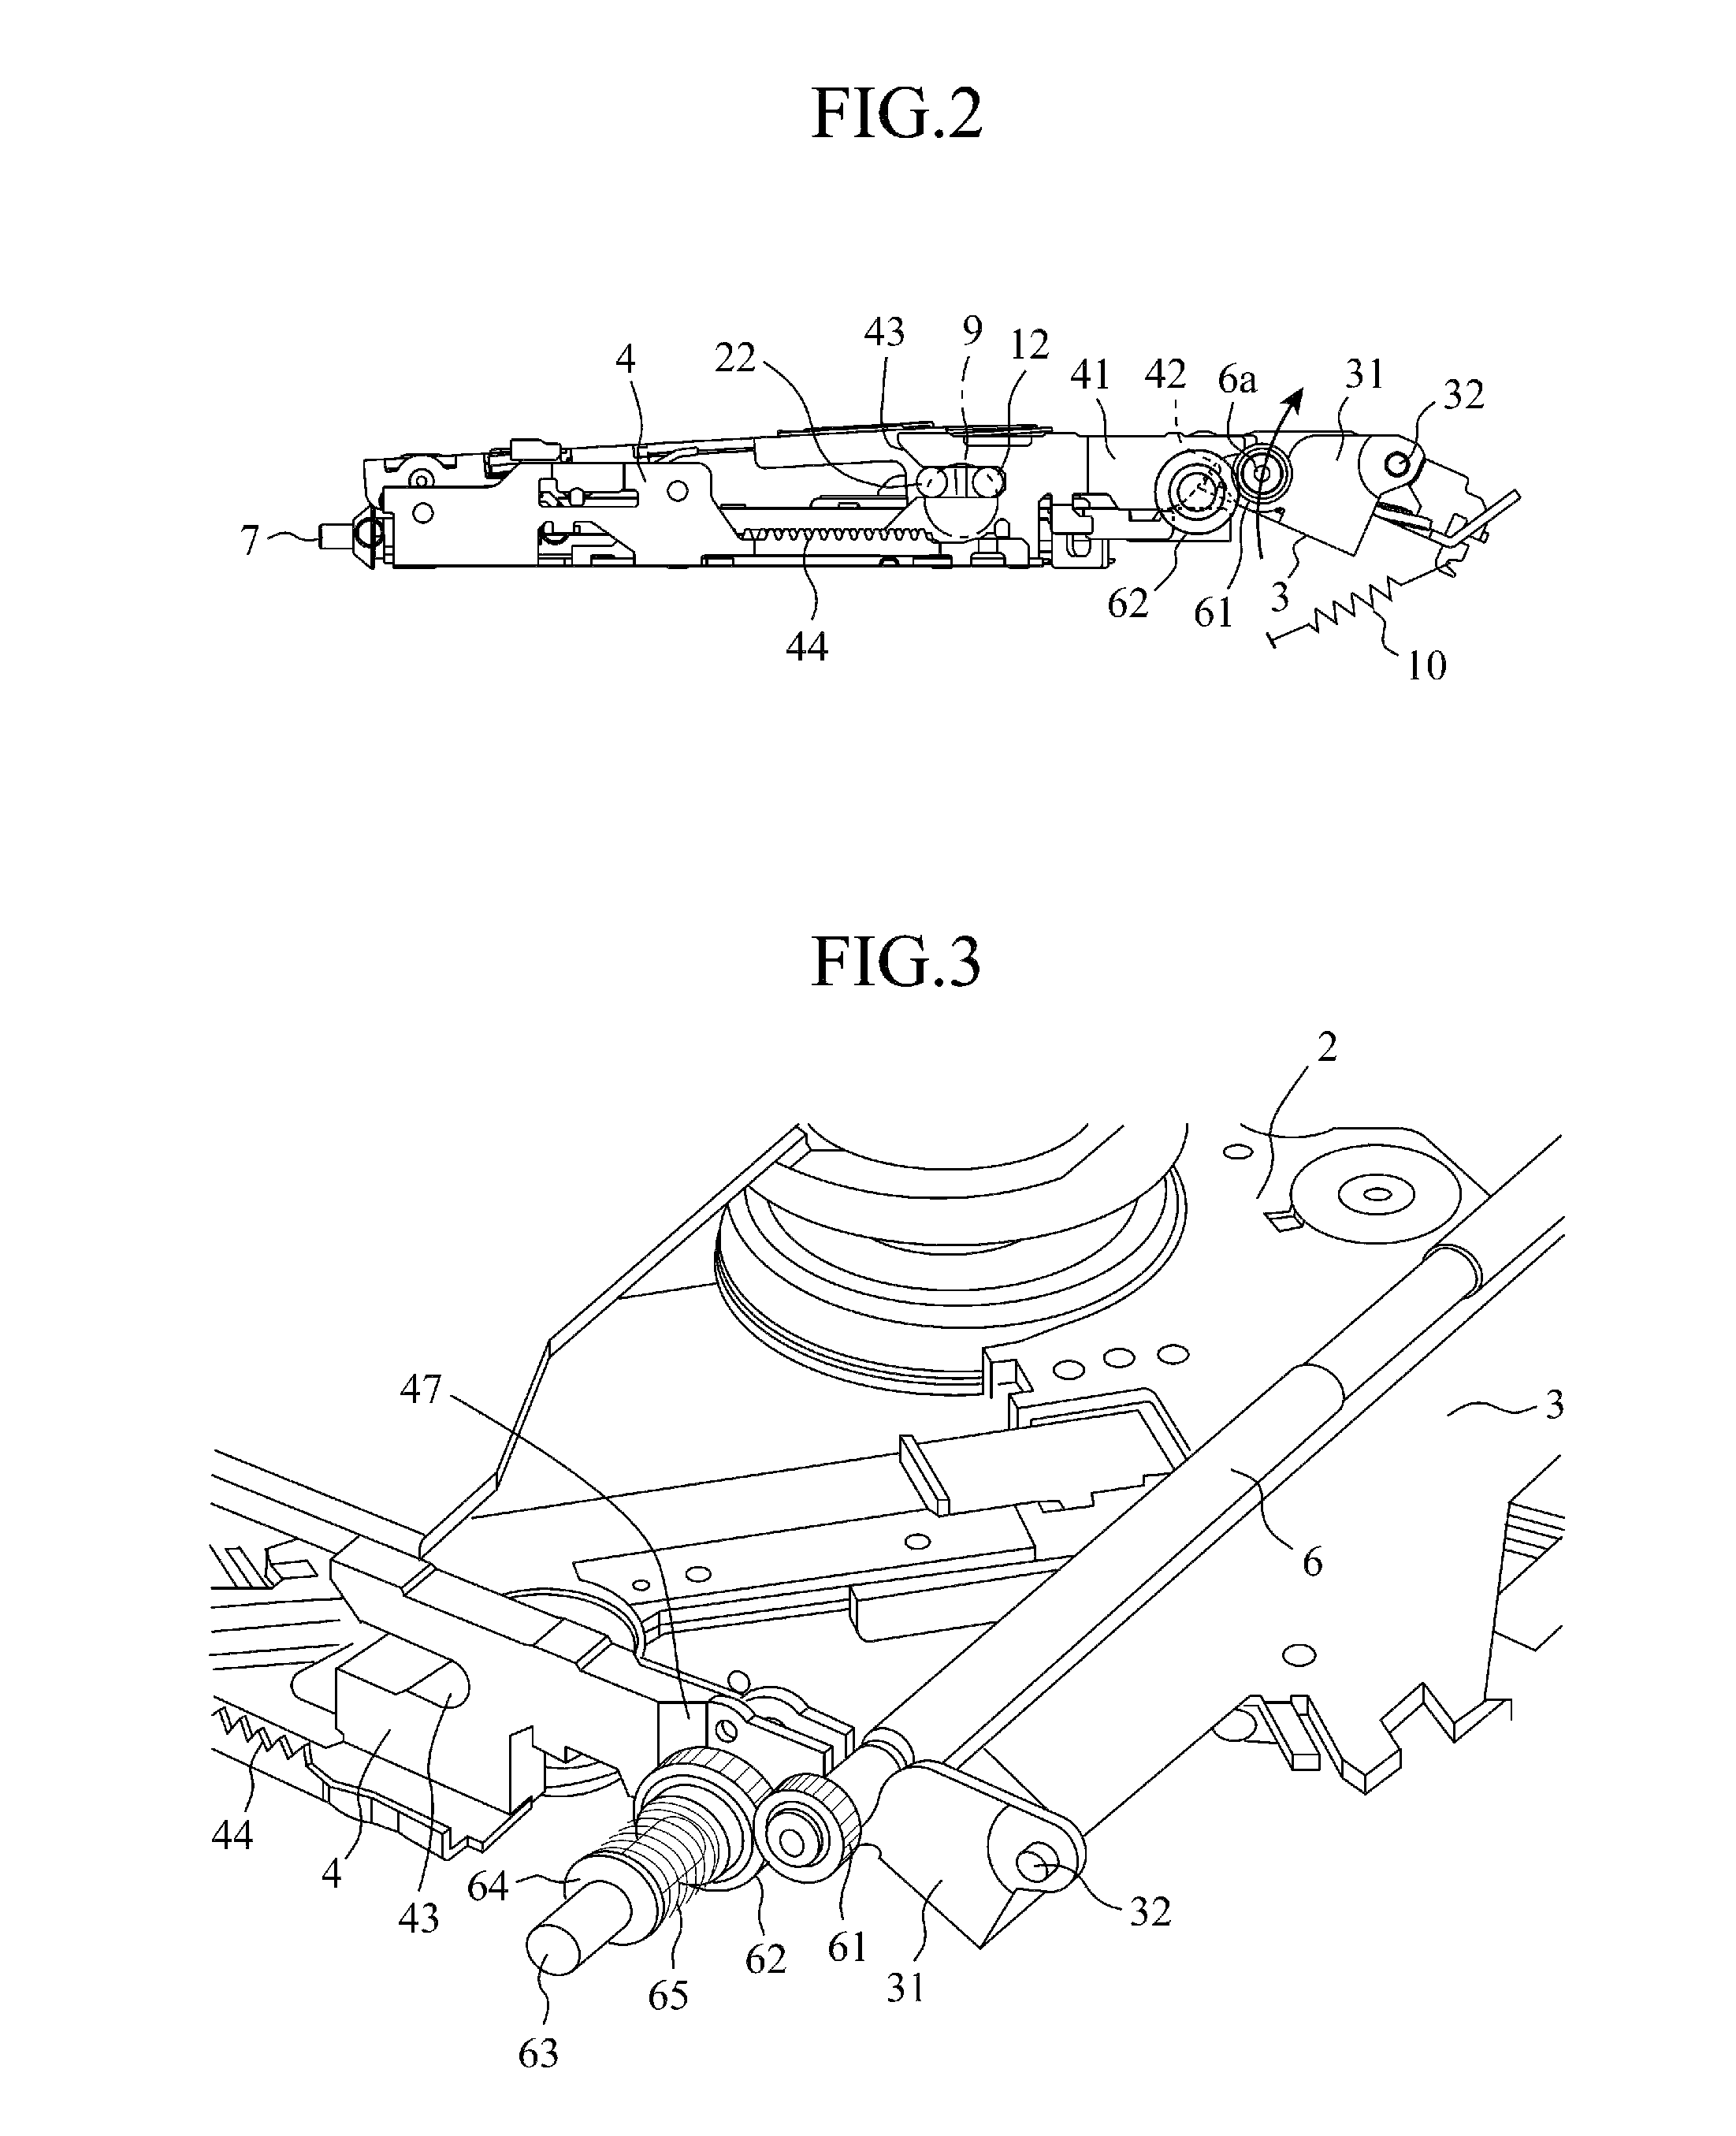 Disk device for loading and unloading a disk with a conveyance roller